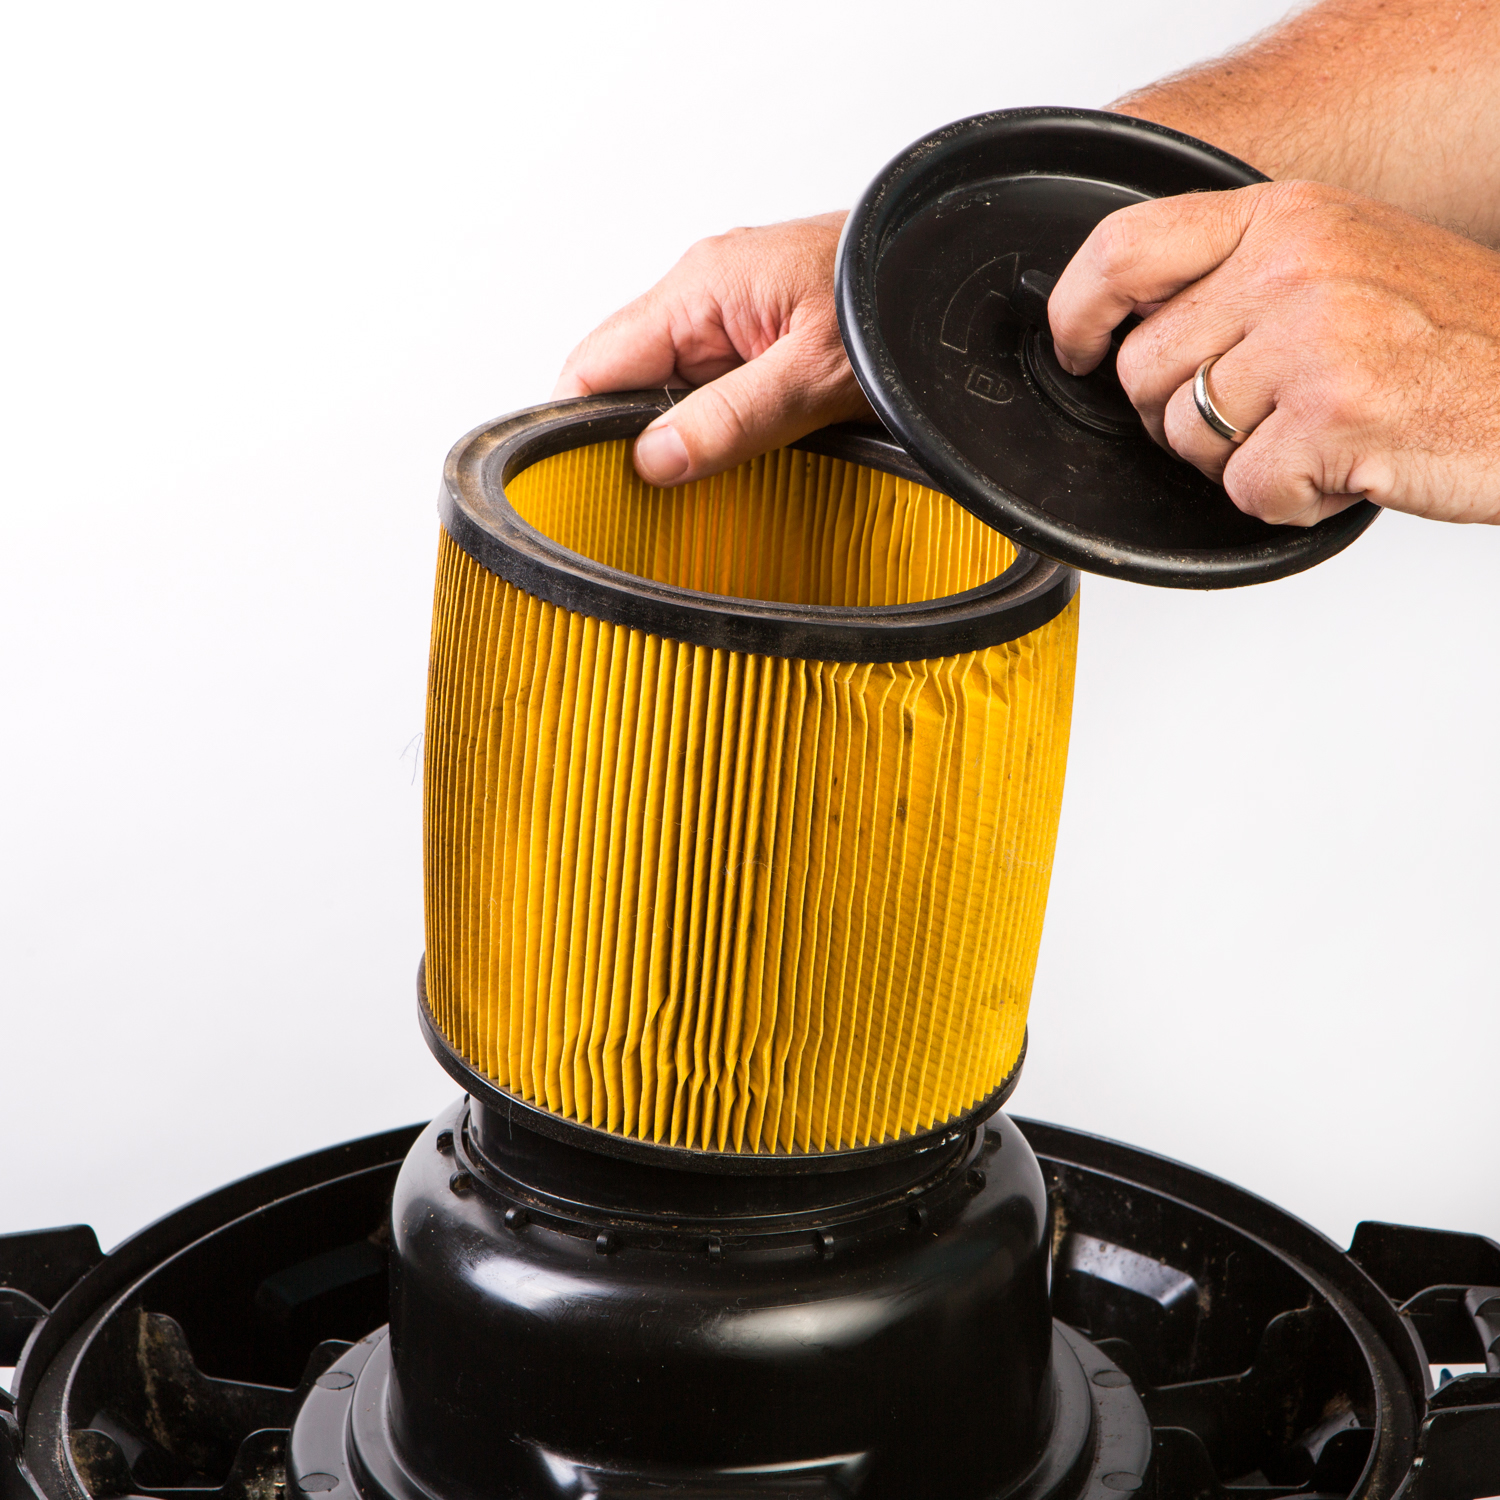 How to Install Shop Vac Filter Bag: A Step-by-Step Guide.